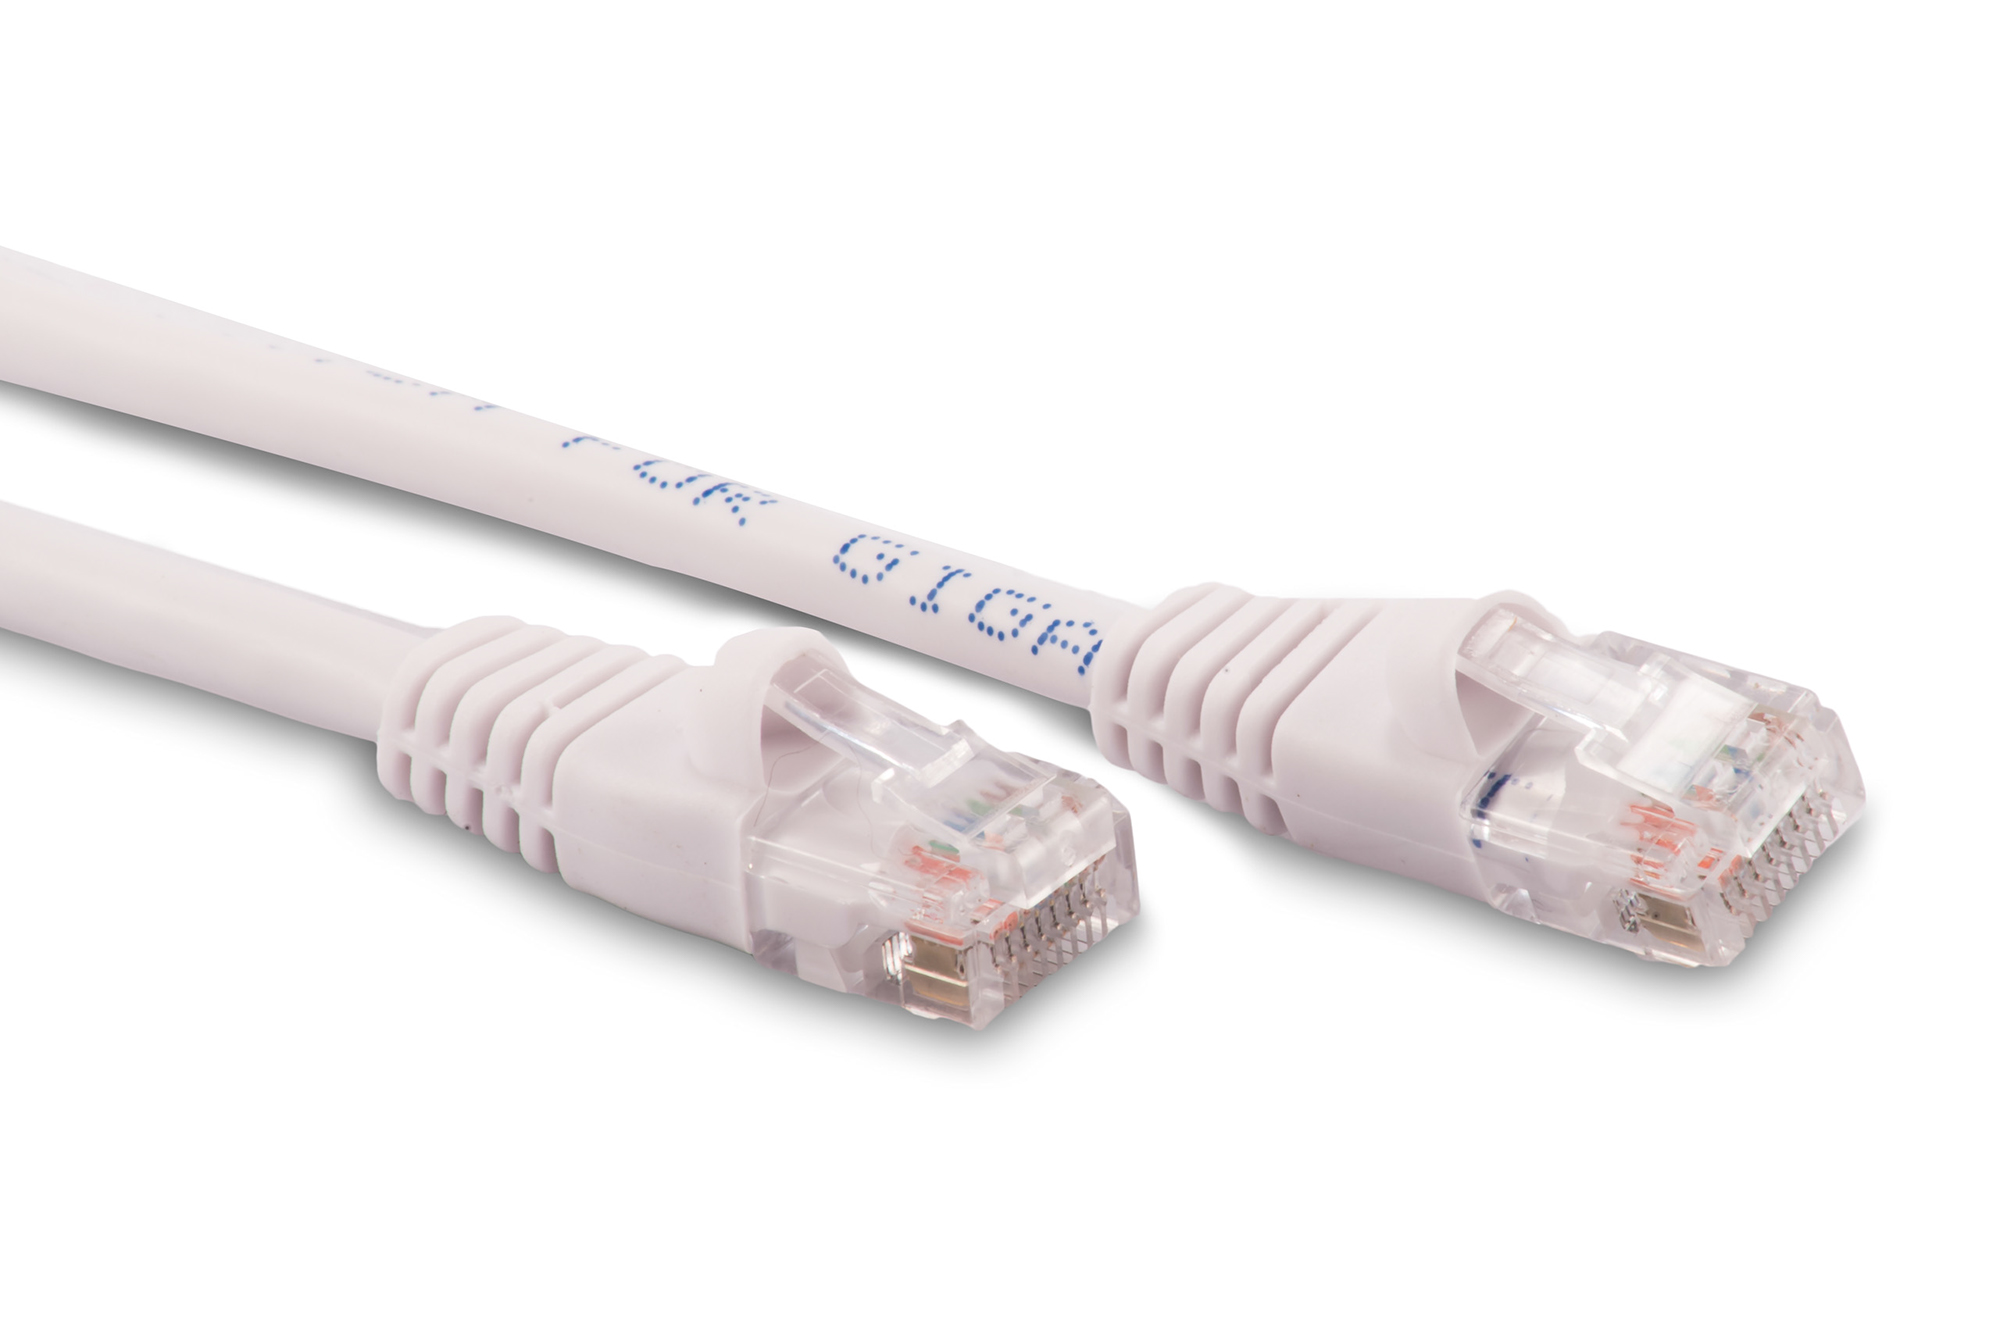 3ft Cat5e Ethernet Patch Cable - White Color - Snagless Boot